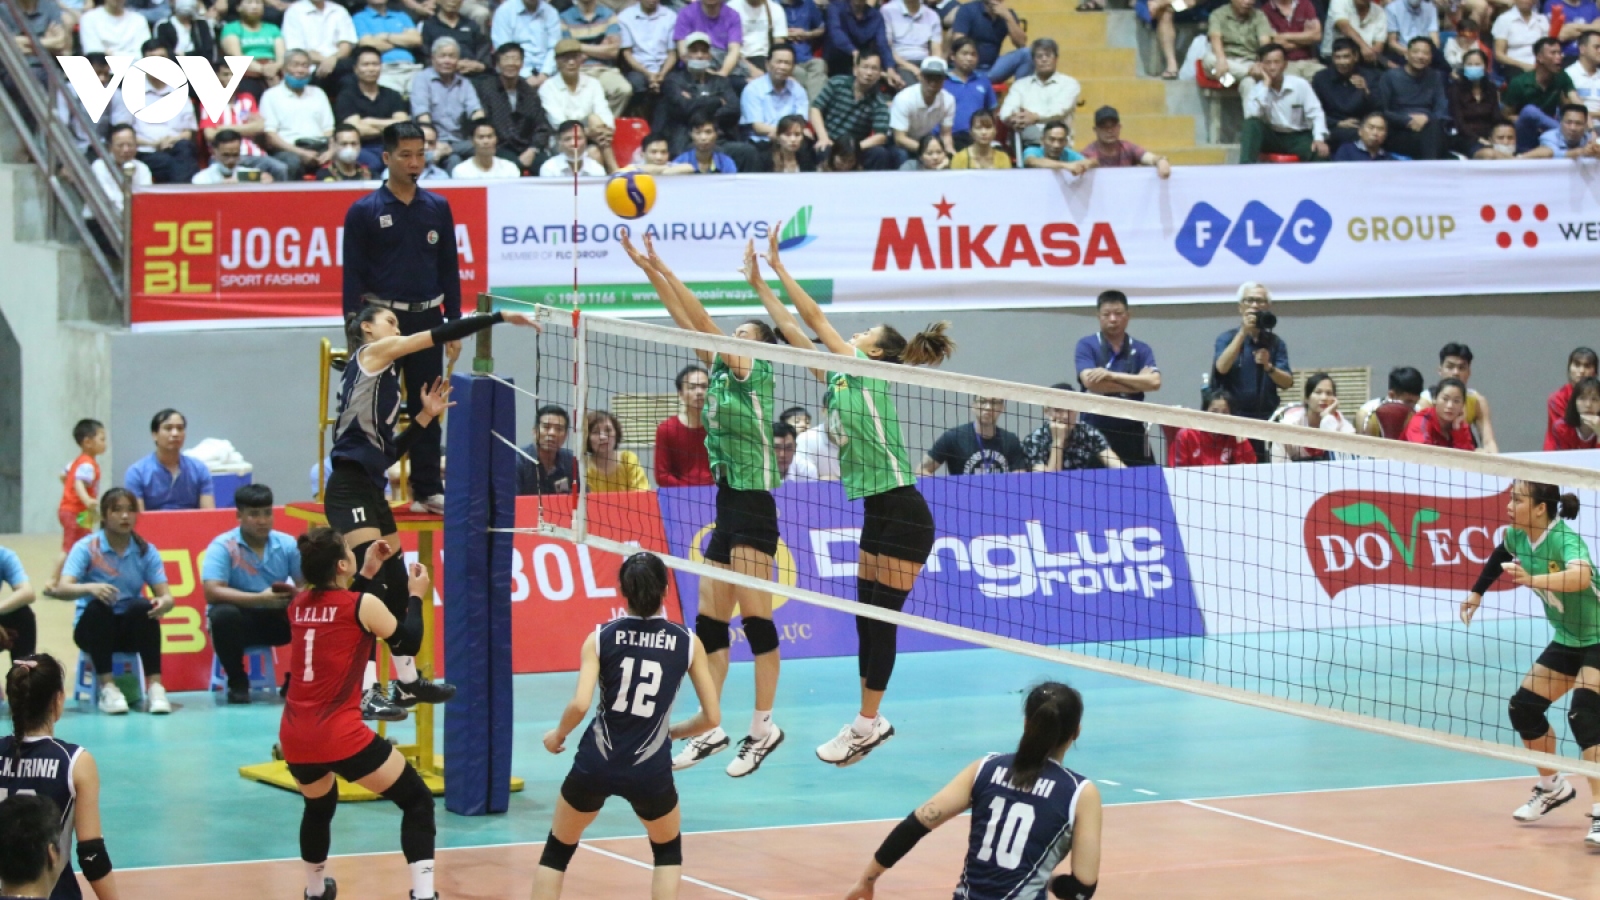 Hung Kings Volleyball Cup 2021 gets underway in Phu Tho